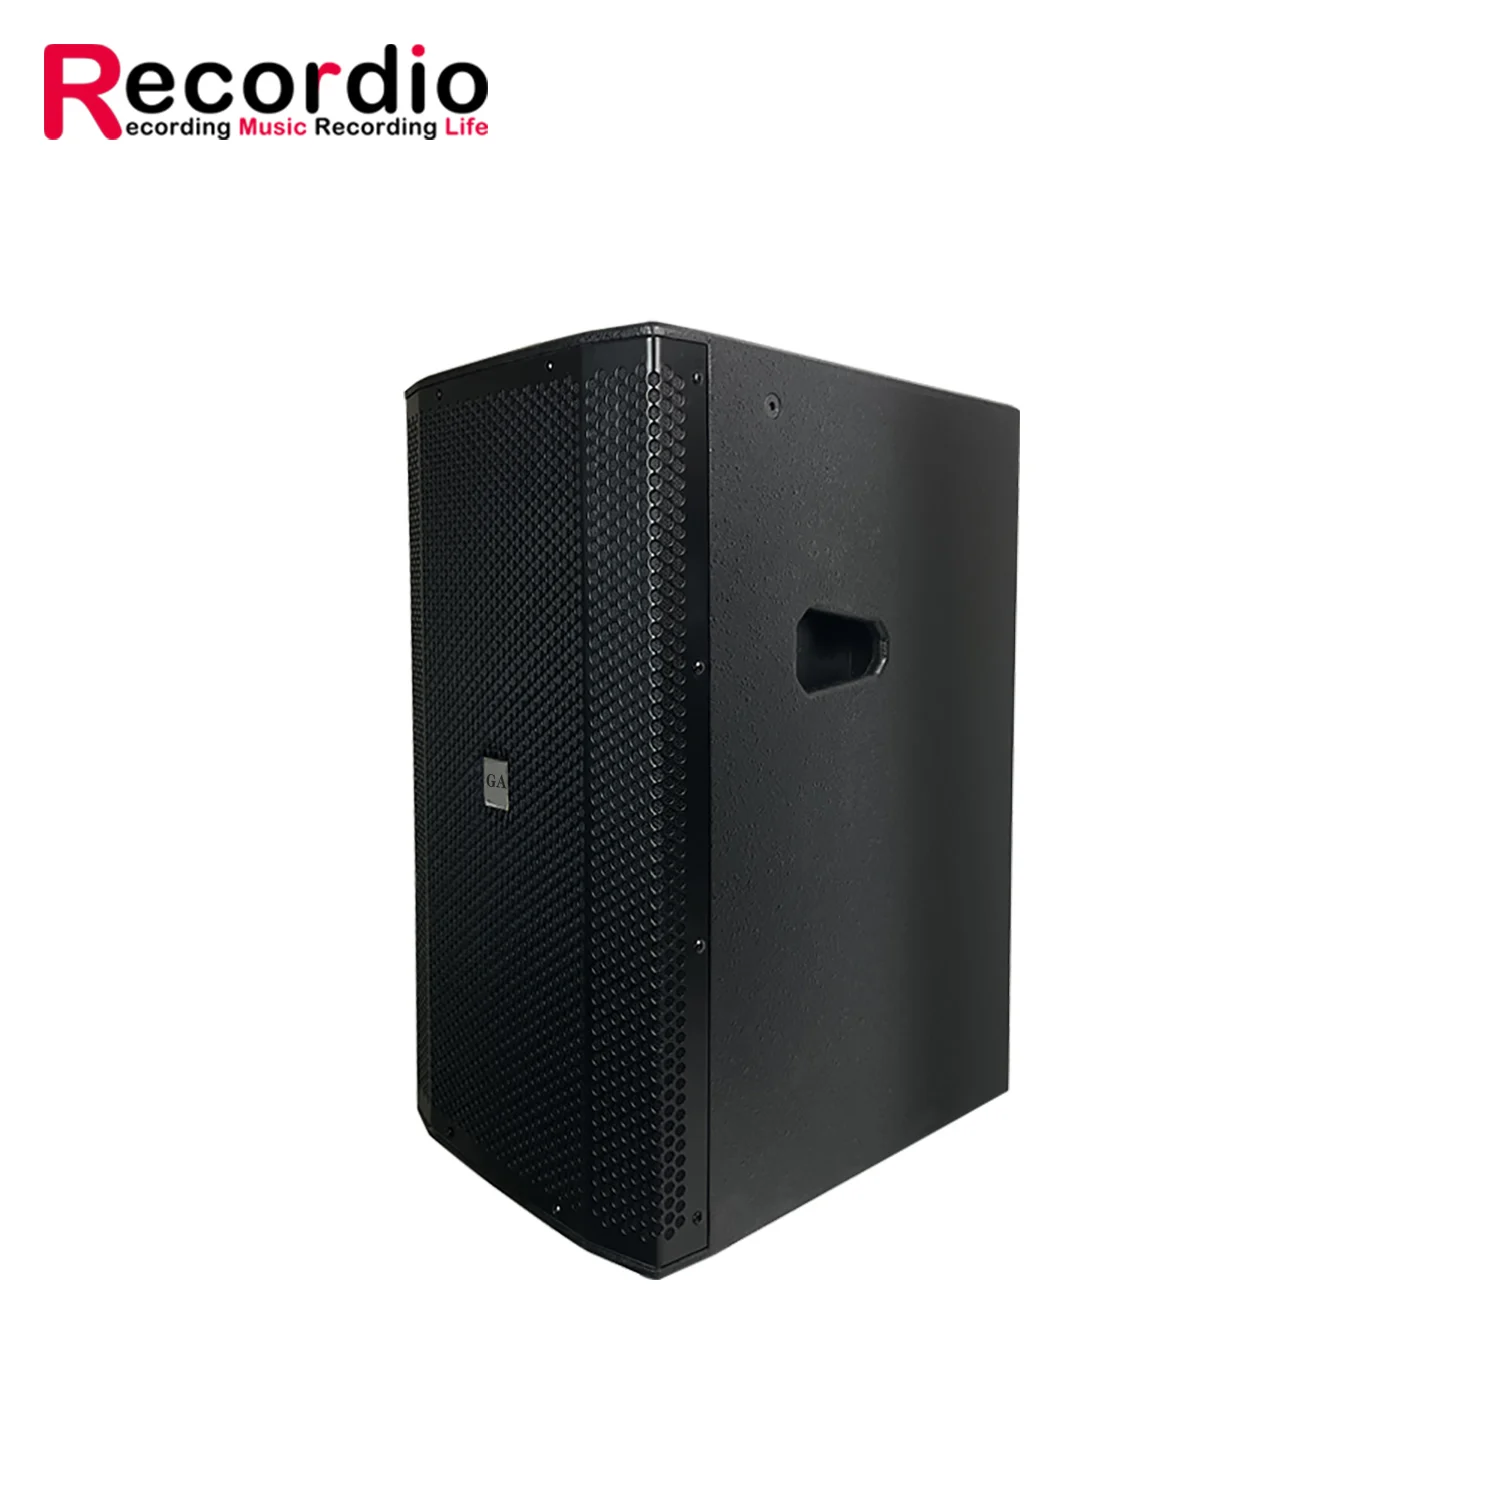 

GAS-260 New Design Professional Audio Speaker 12 Inch 800W Karaoke Speaker Good Quality for Conference Speech Stage Performance